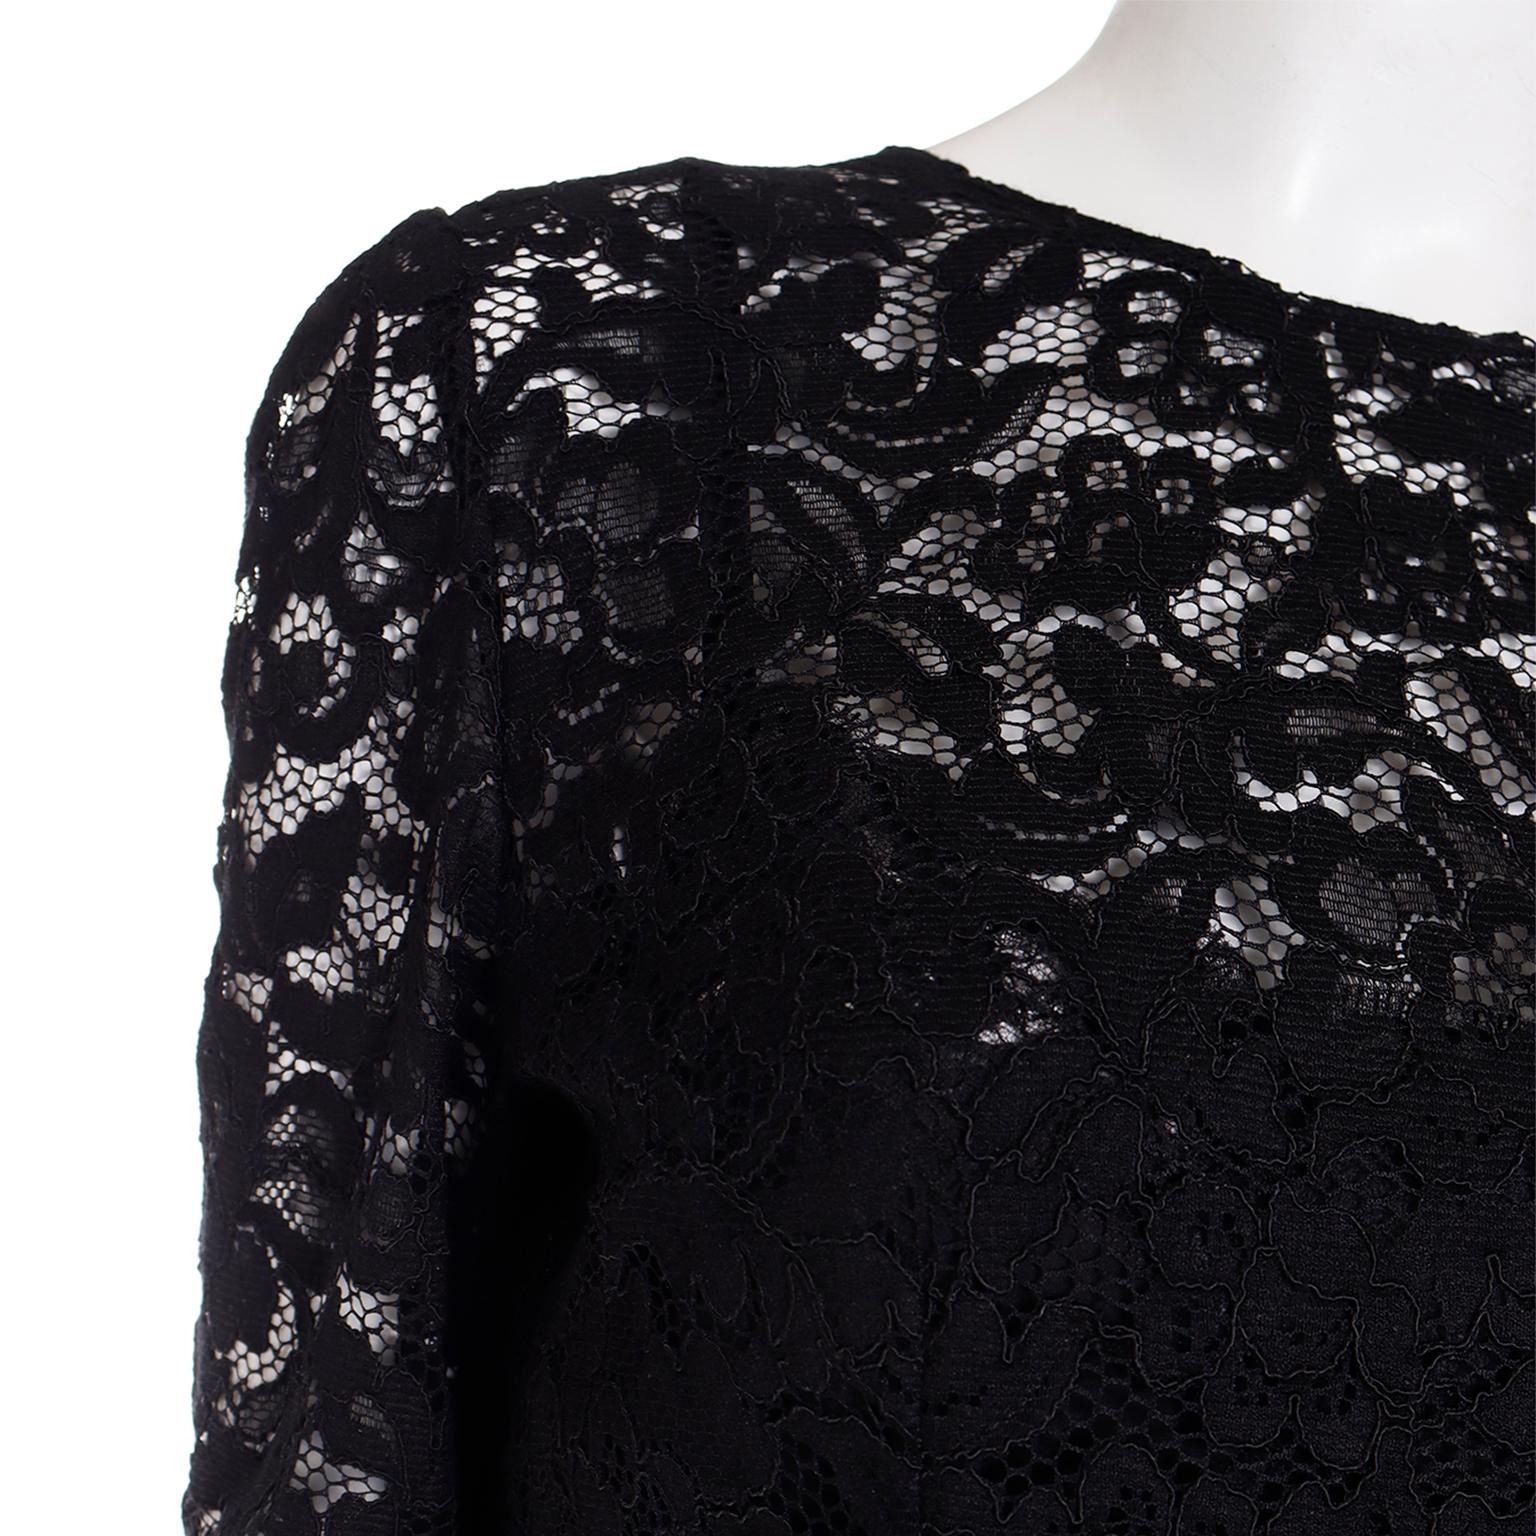 Dolce & Gabbana Black Lace Blouse Top With Long Sleeves & Built in Camisole For Sale 1